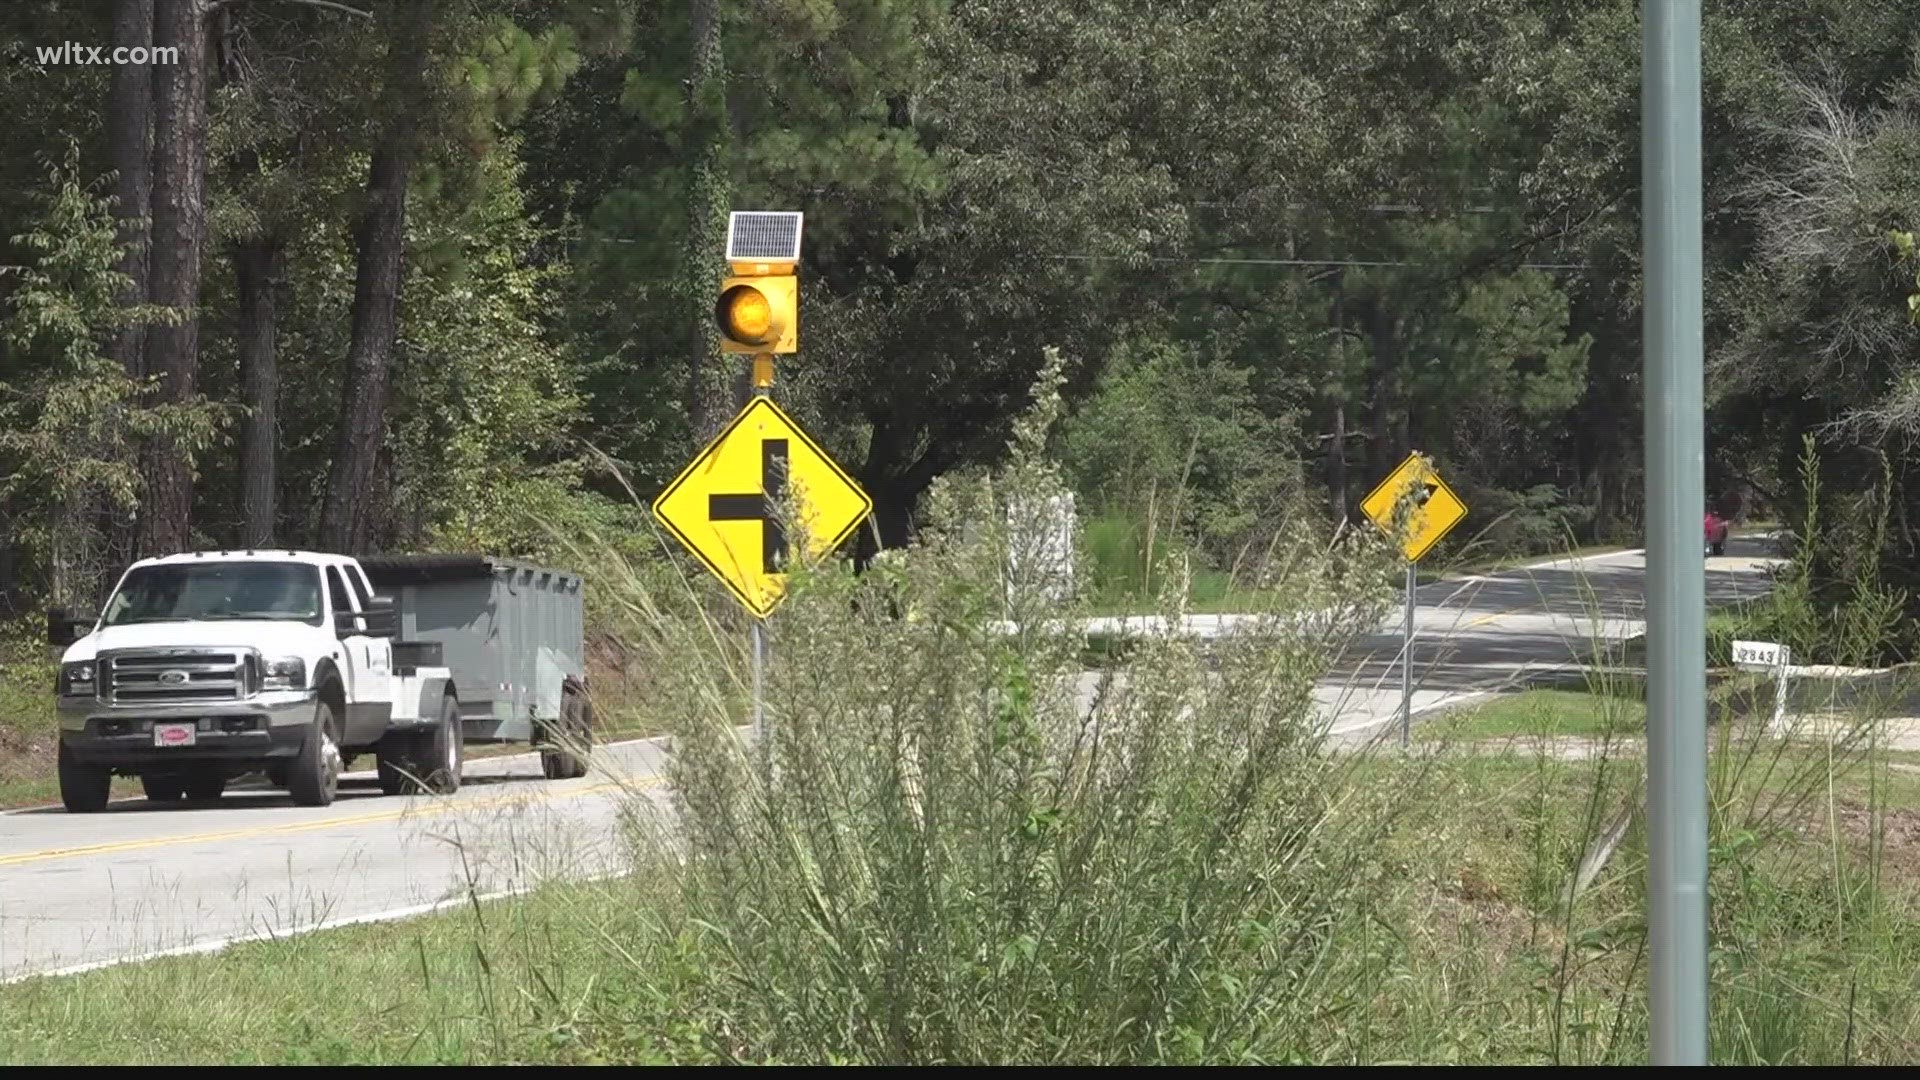 Locals hope this reduces the number of car accidents on the road.